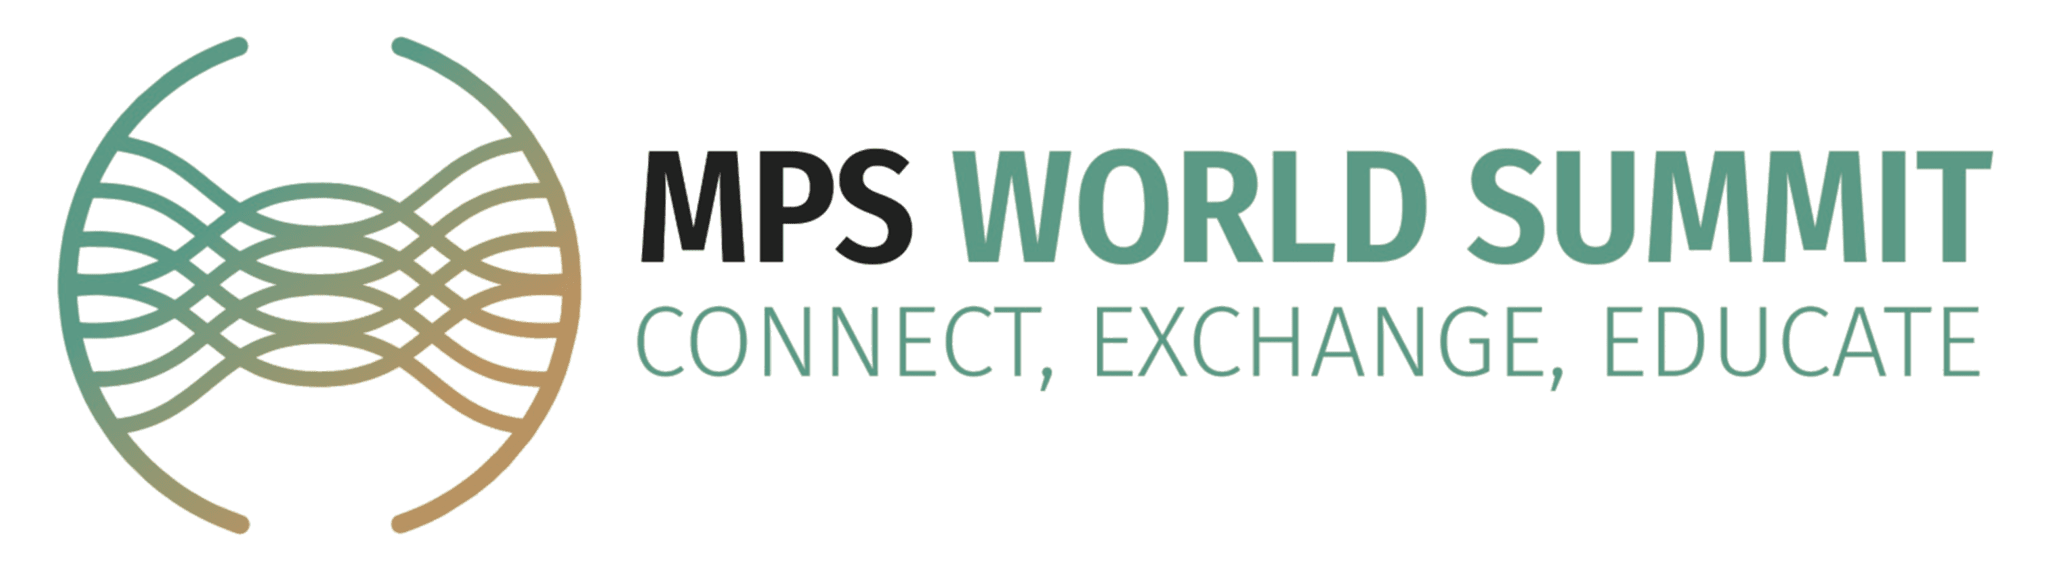 MPS World Summit | Connect, Exchange, Educate